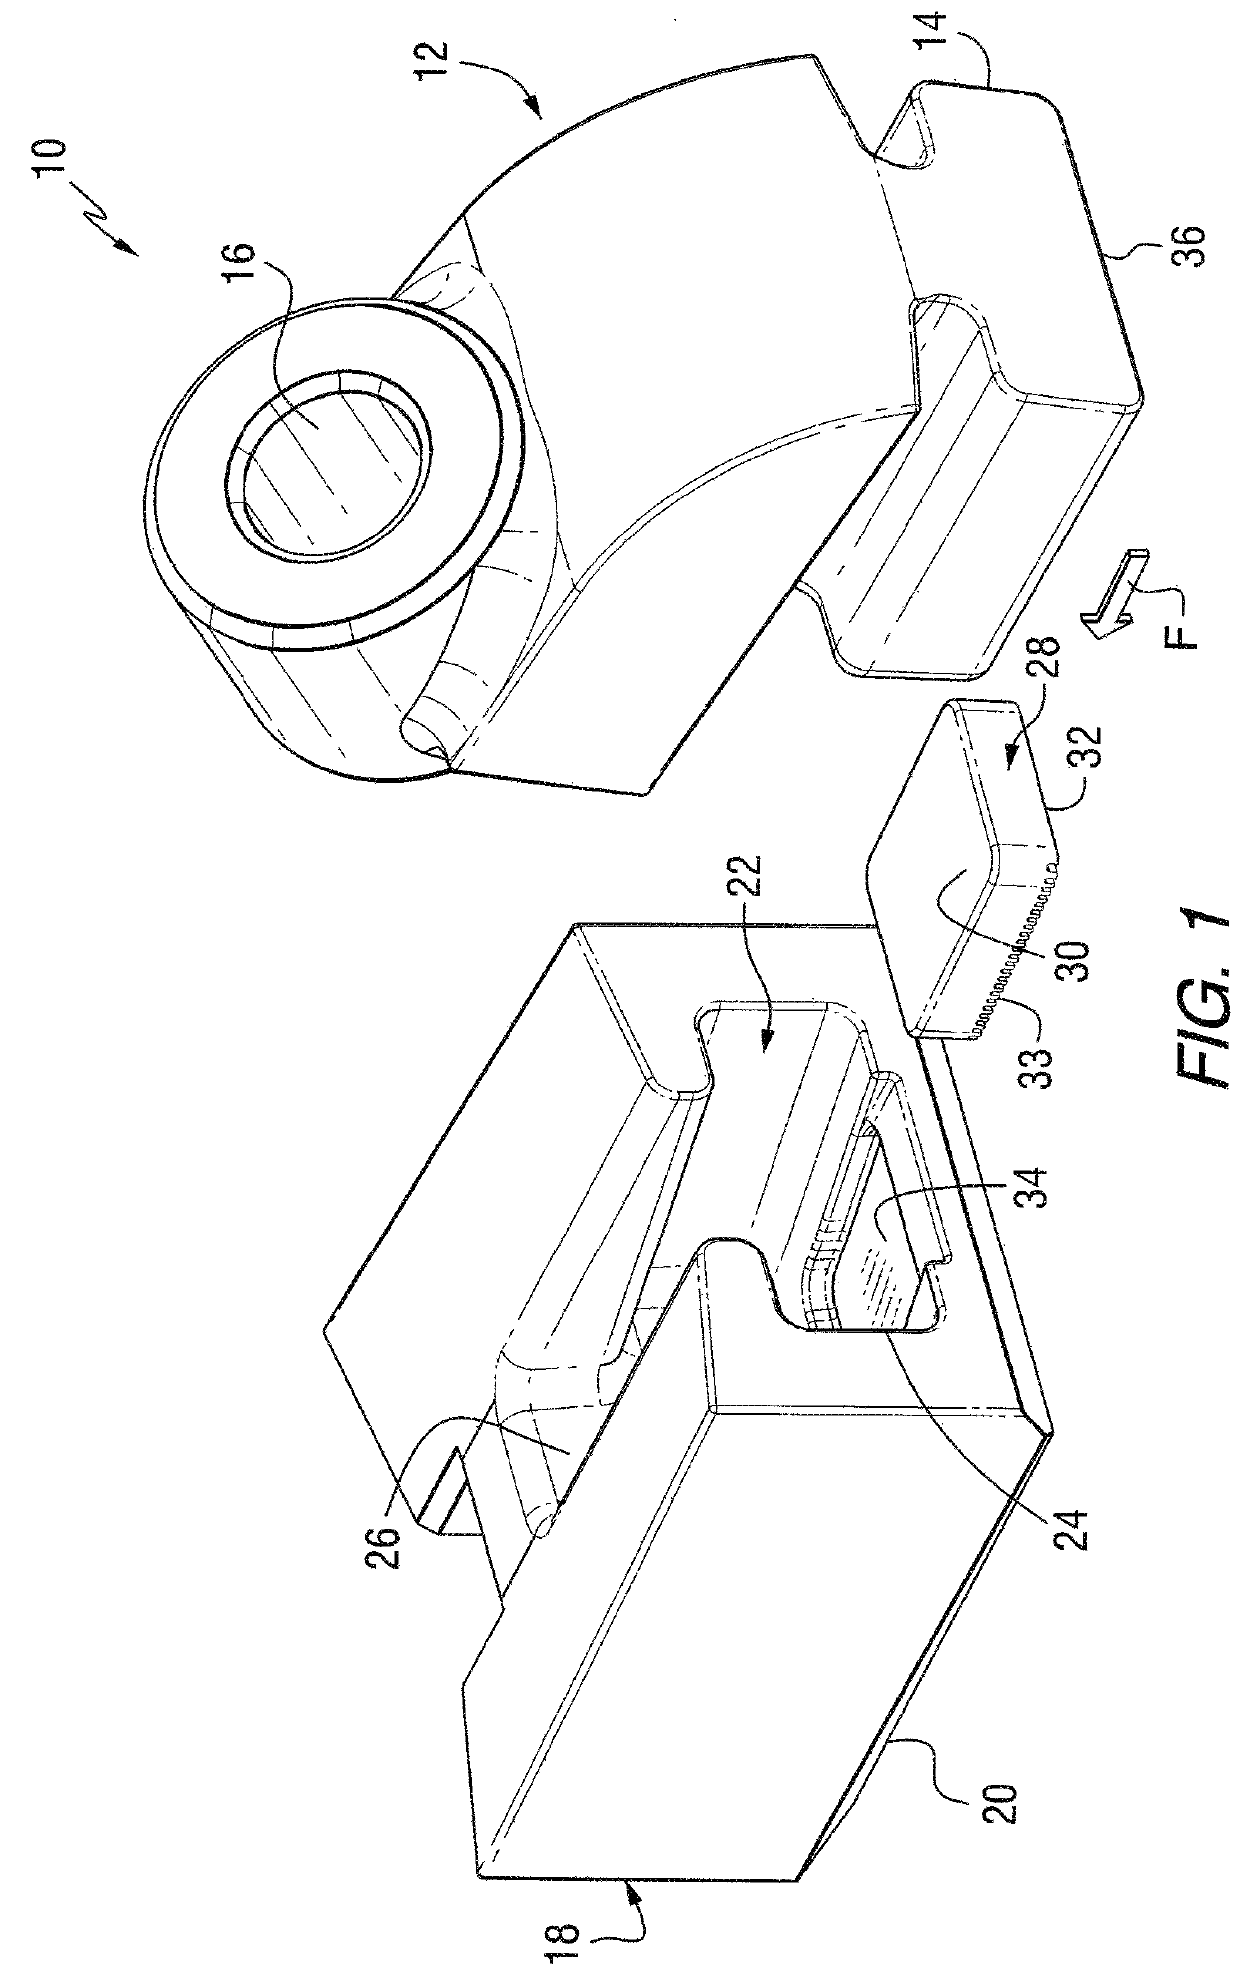 Cutting tool mounting assembly